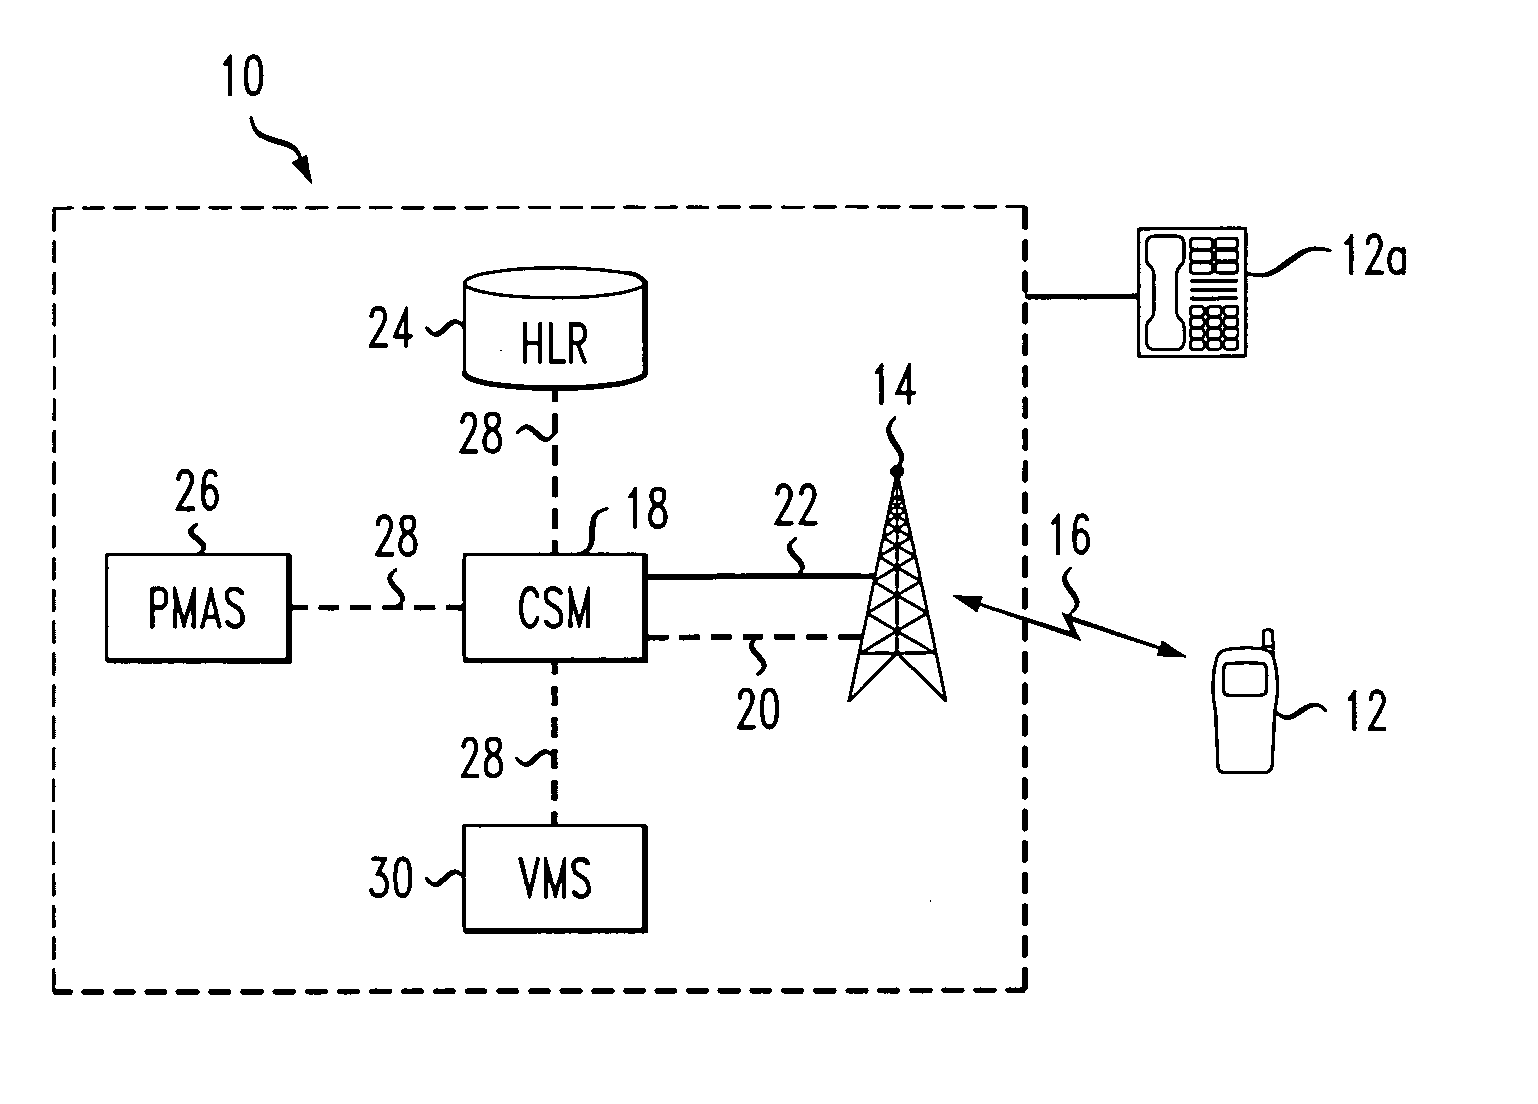 Protected mode for mobile communications terminals